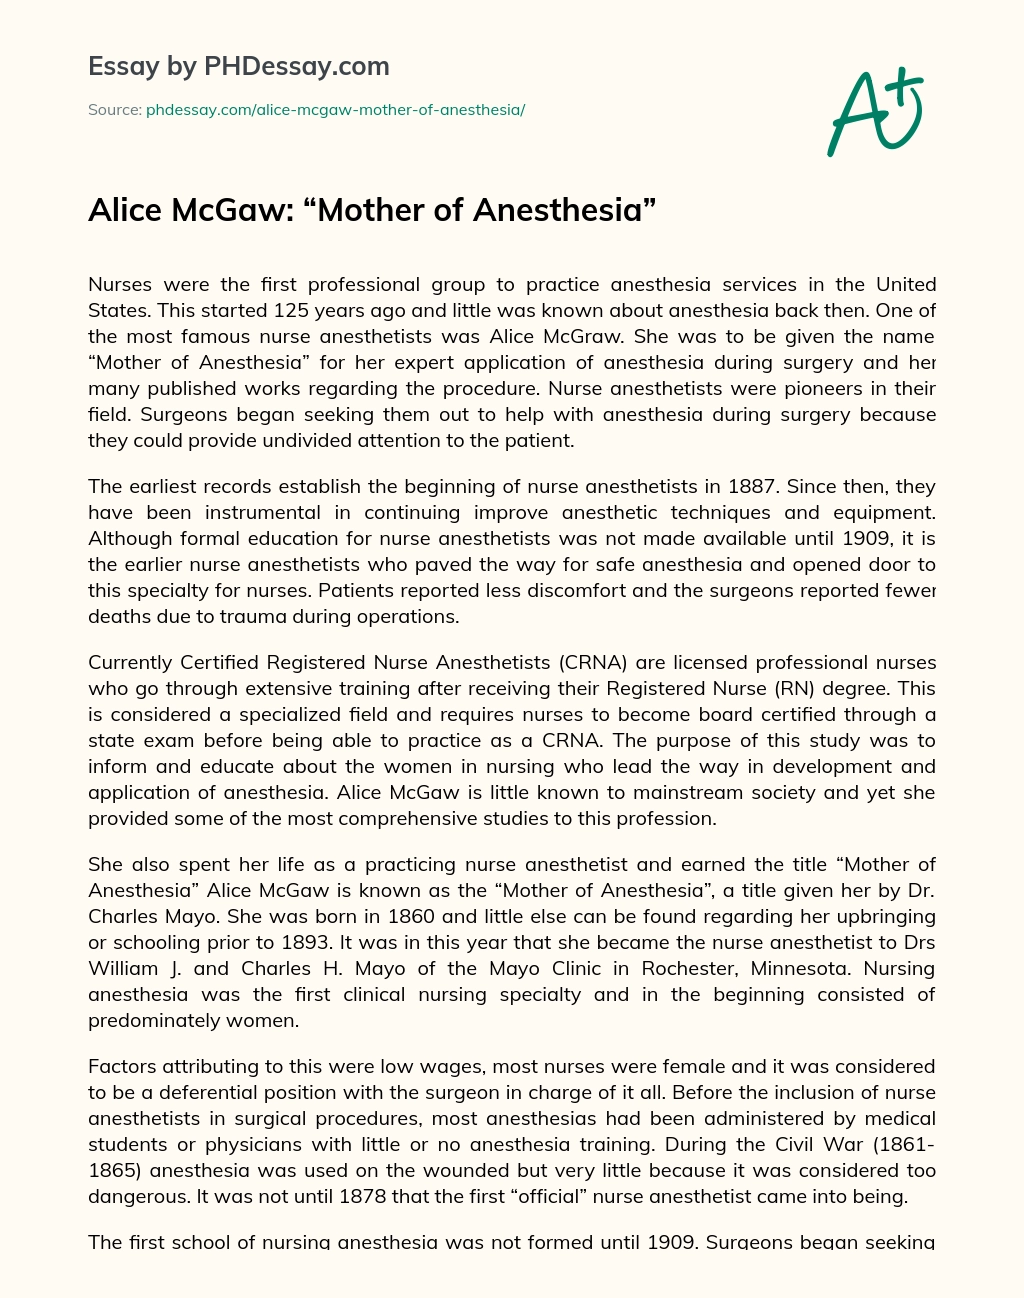 Alice McGaw: “Mother of Anesthesia” essay